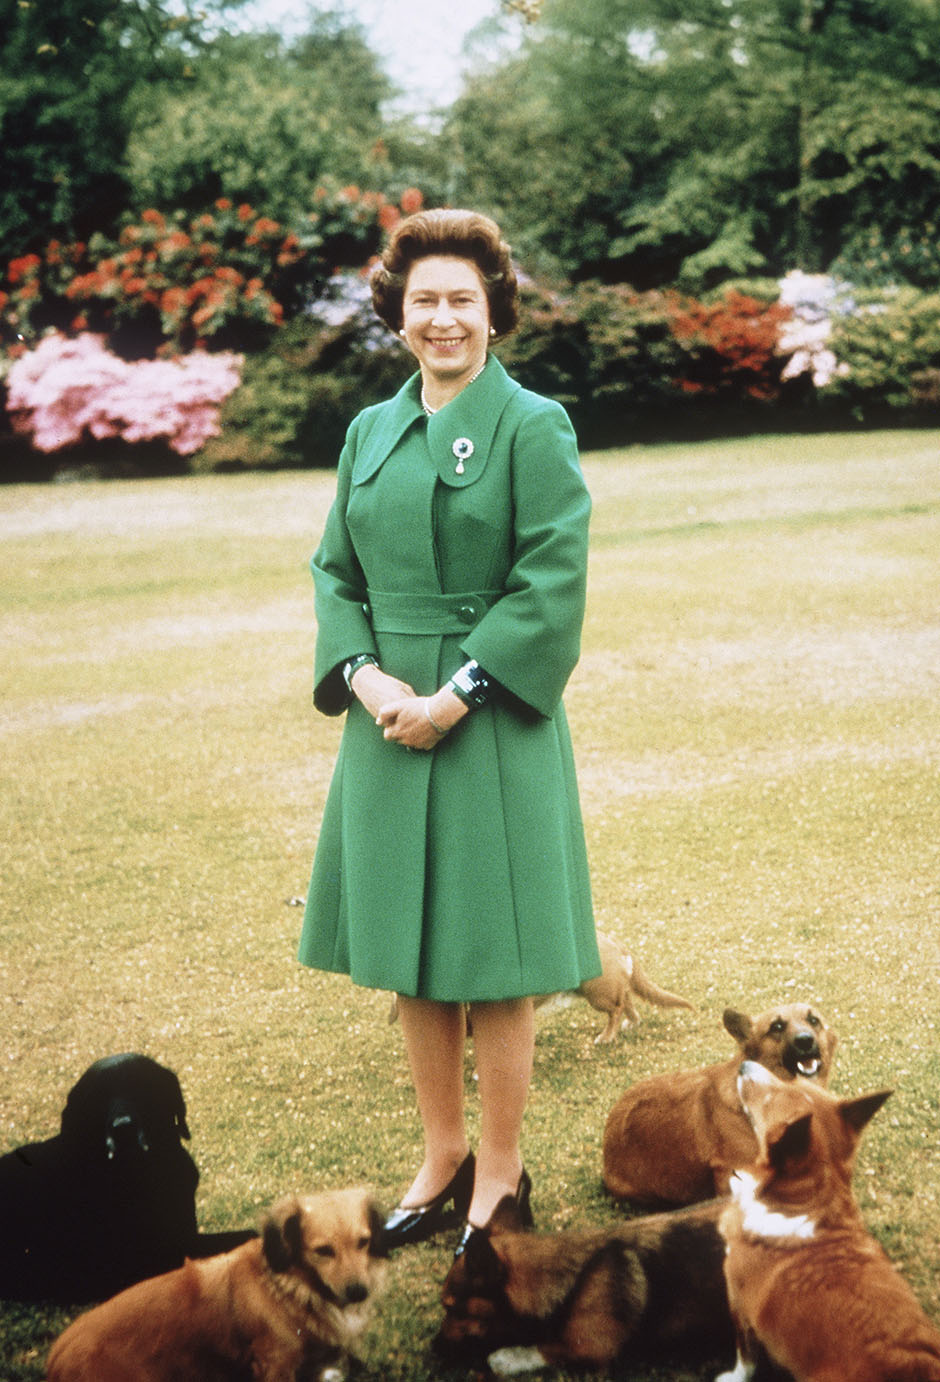 SANDRINGHAM; UNITED KINGDOM - UNSPECIFIED DATE: Queen Elizabeth II relaxes at Sandringham with her corgis. (Photo by Anwar Hussein/Getty Images)